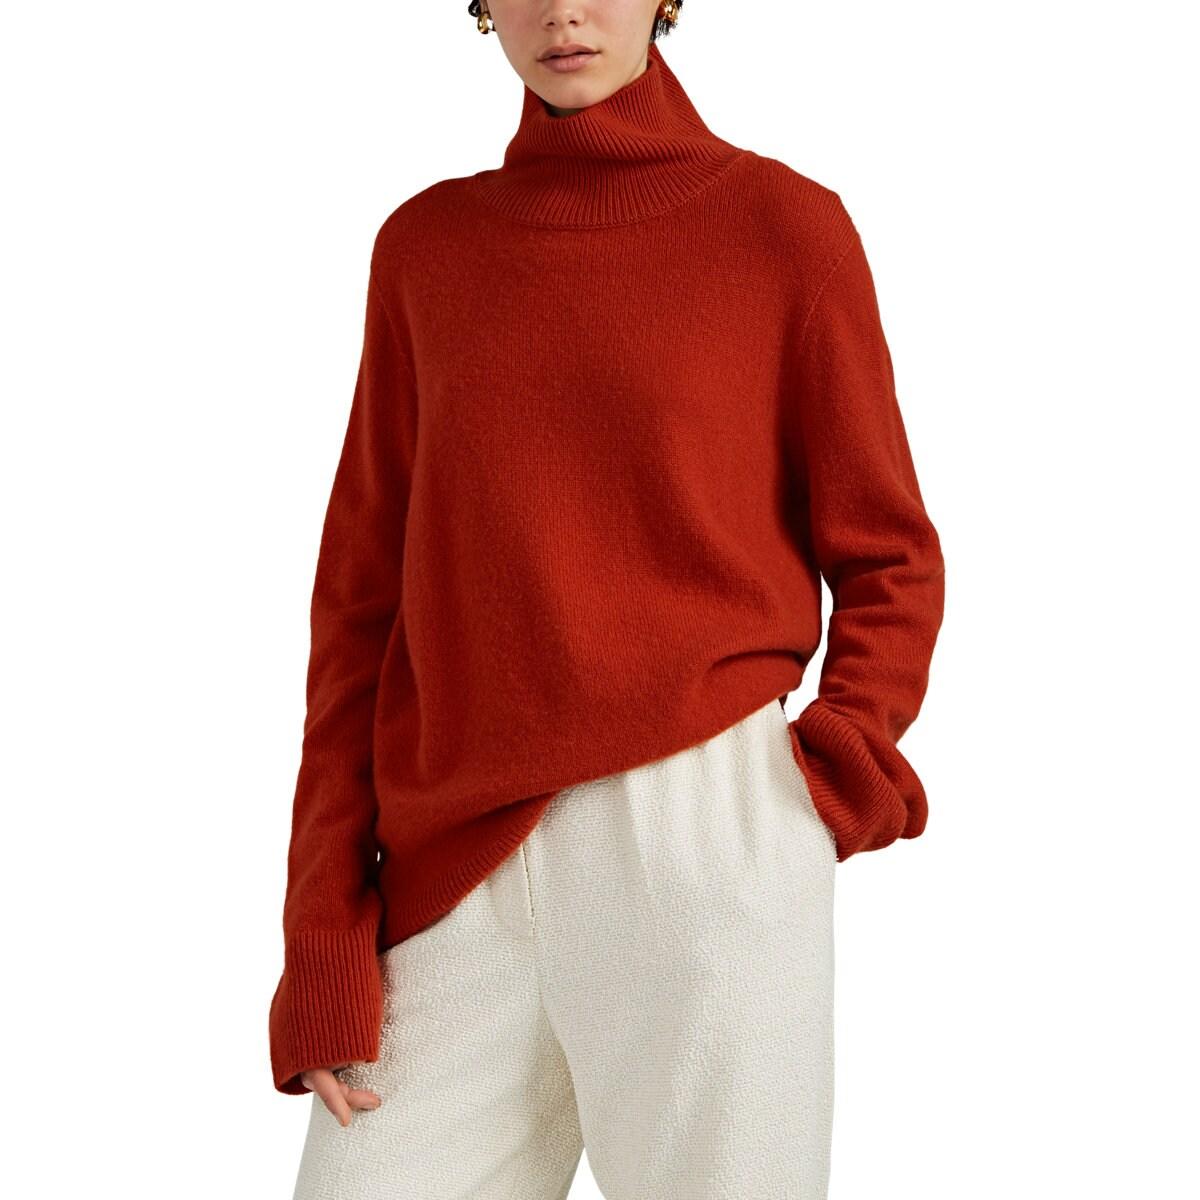 The Row Milina Wool-cashmere Turtleneck Sweater in Rust (Red) - Lyst